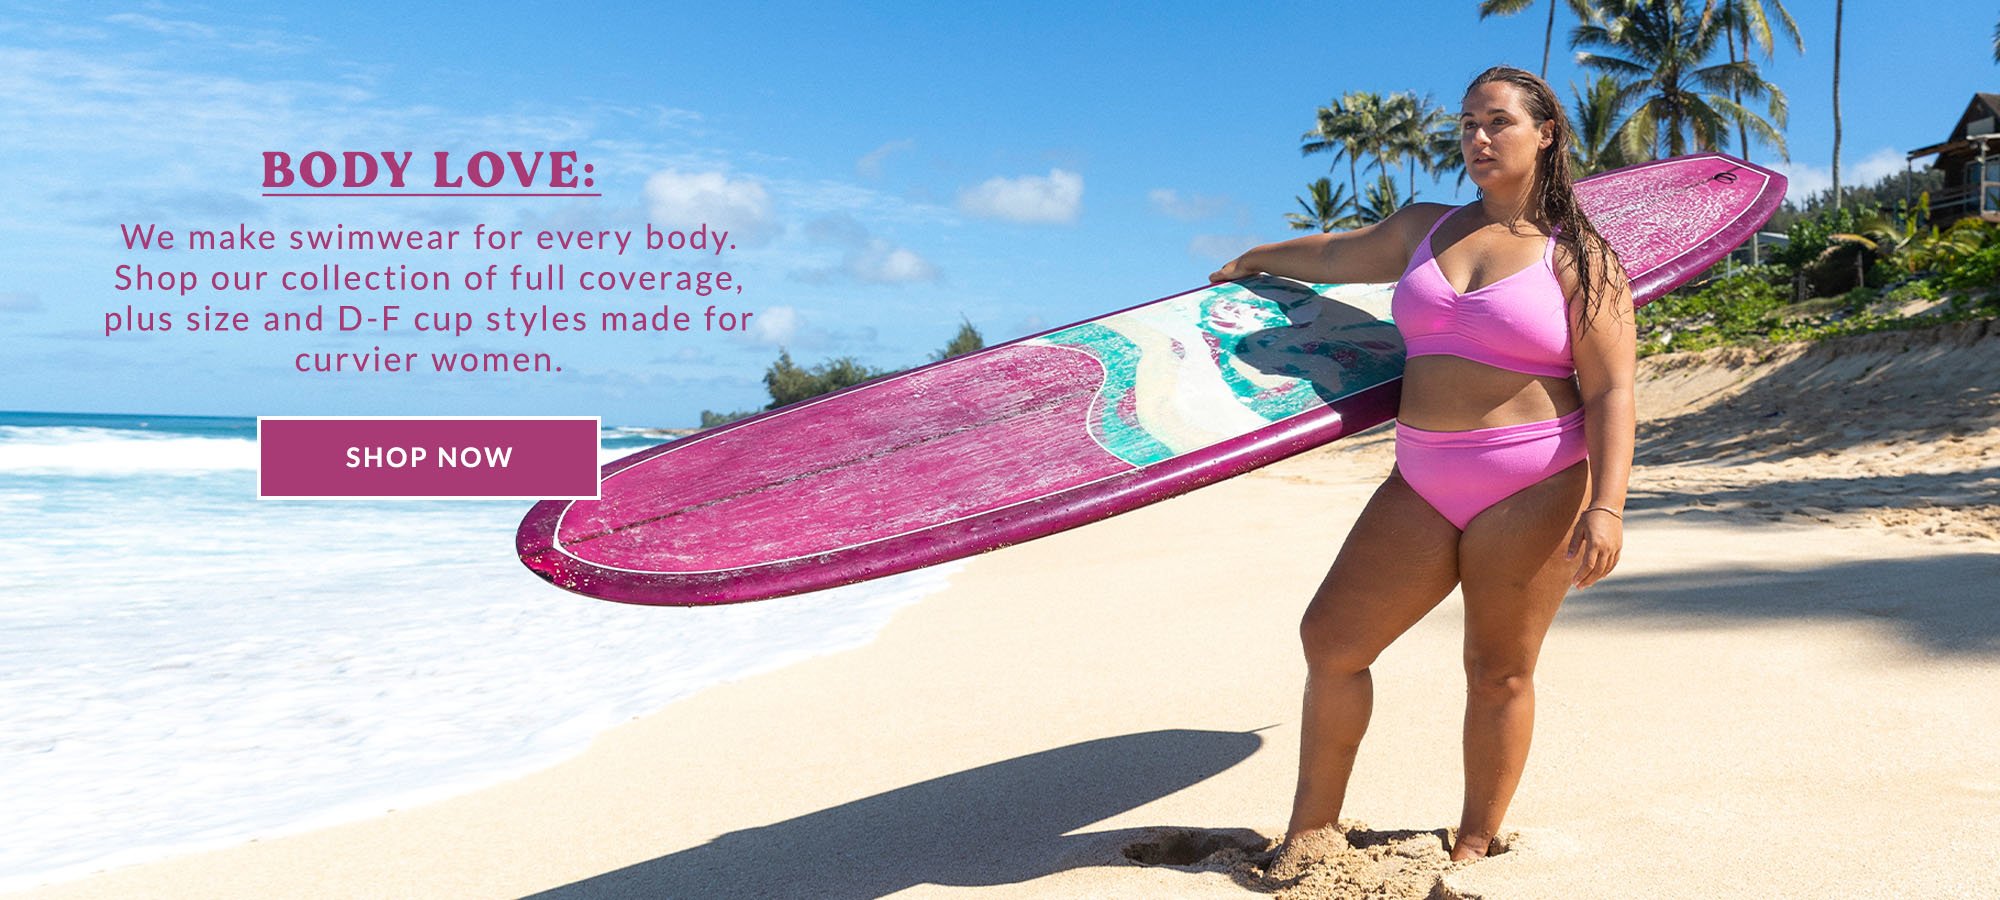 Body Love - swimwear for every body. Shop full coverage, plus-size, and D-F-cup styles for curvier women